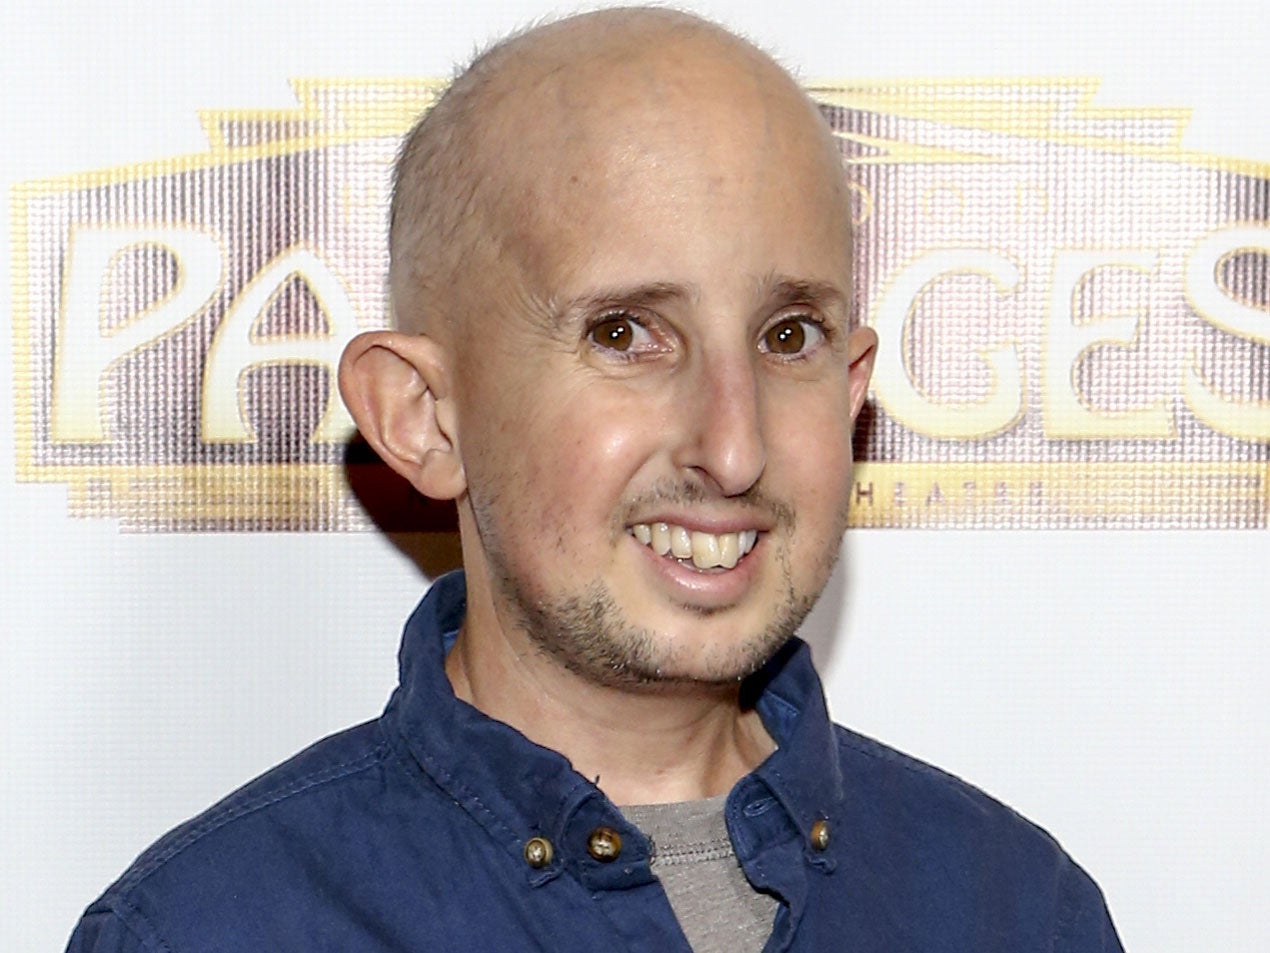 Ben Woolf is reportedly in a critical condition